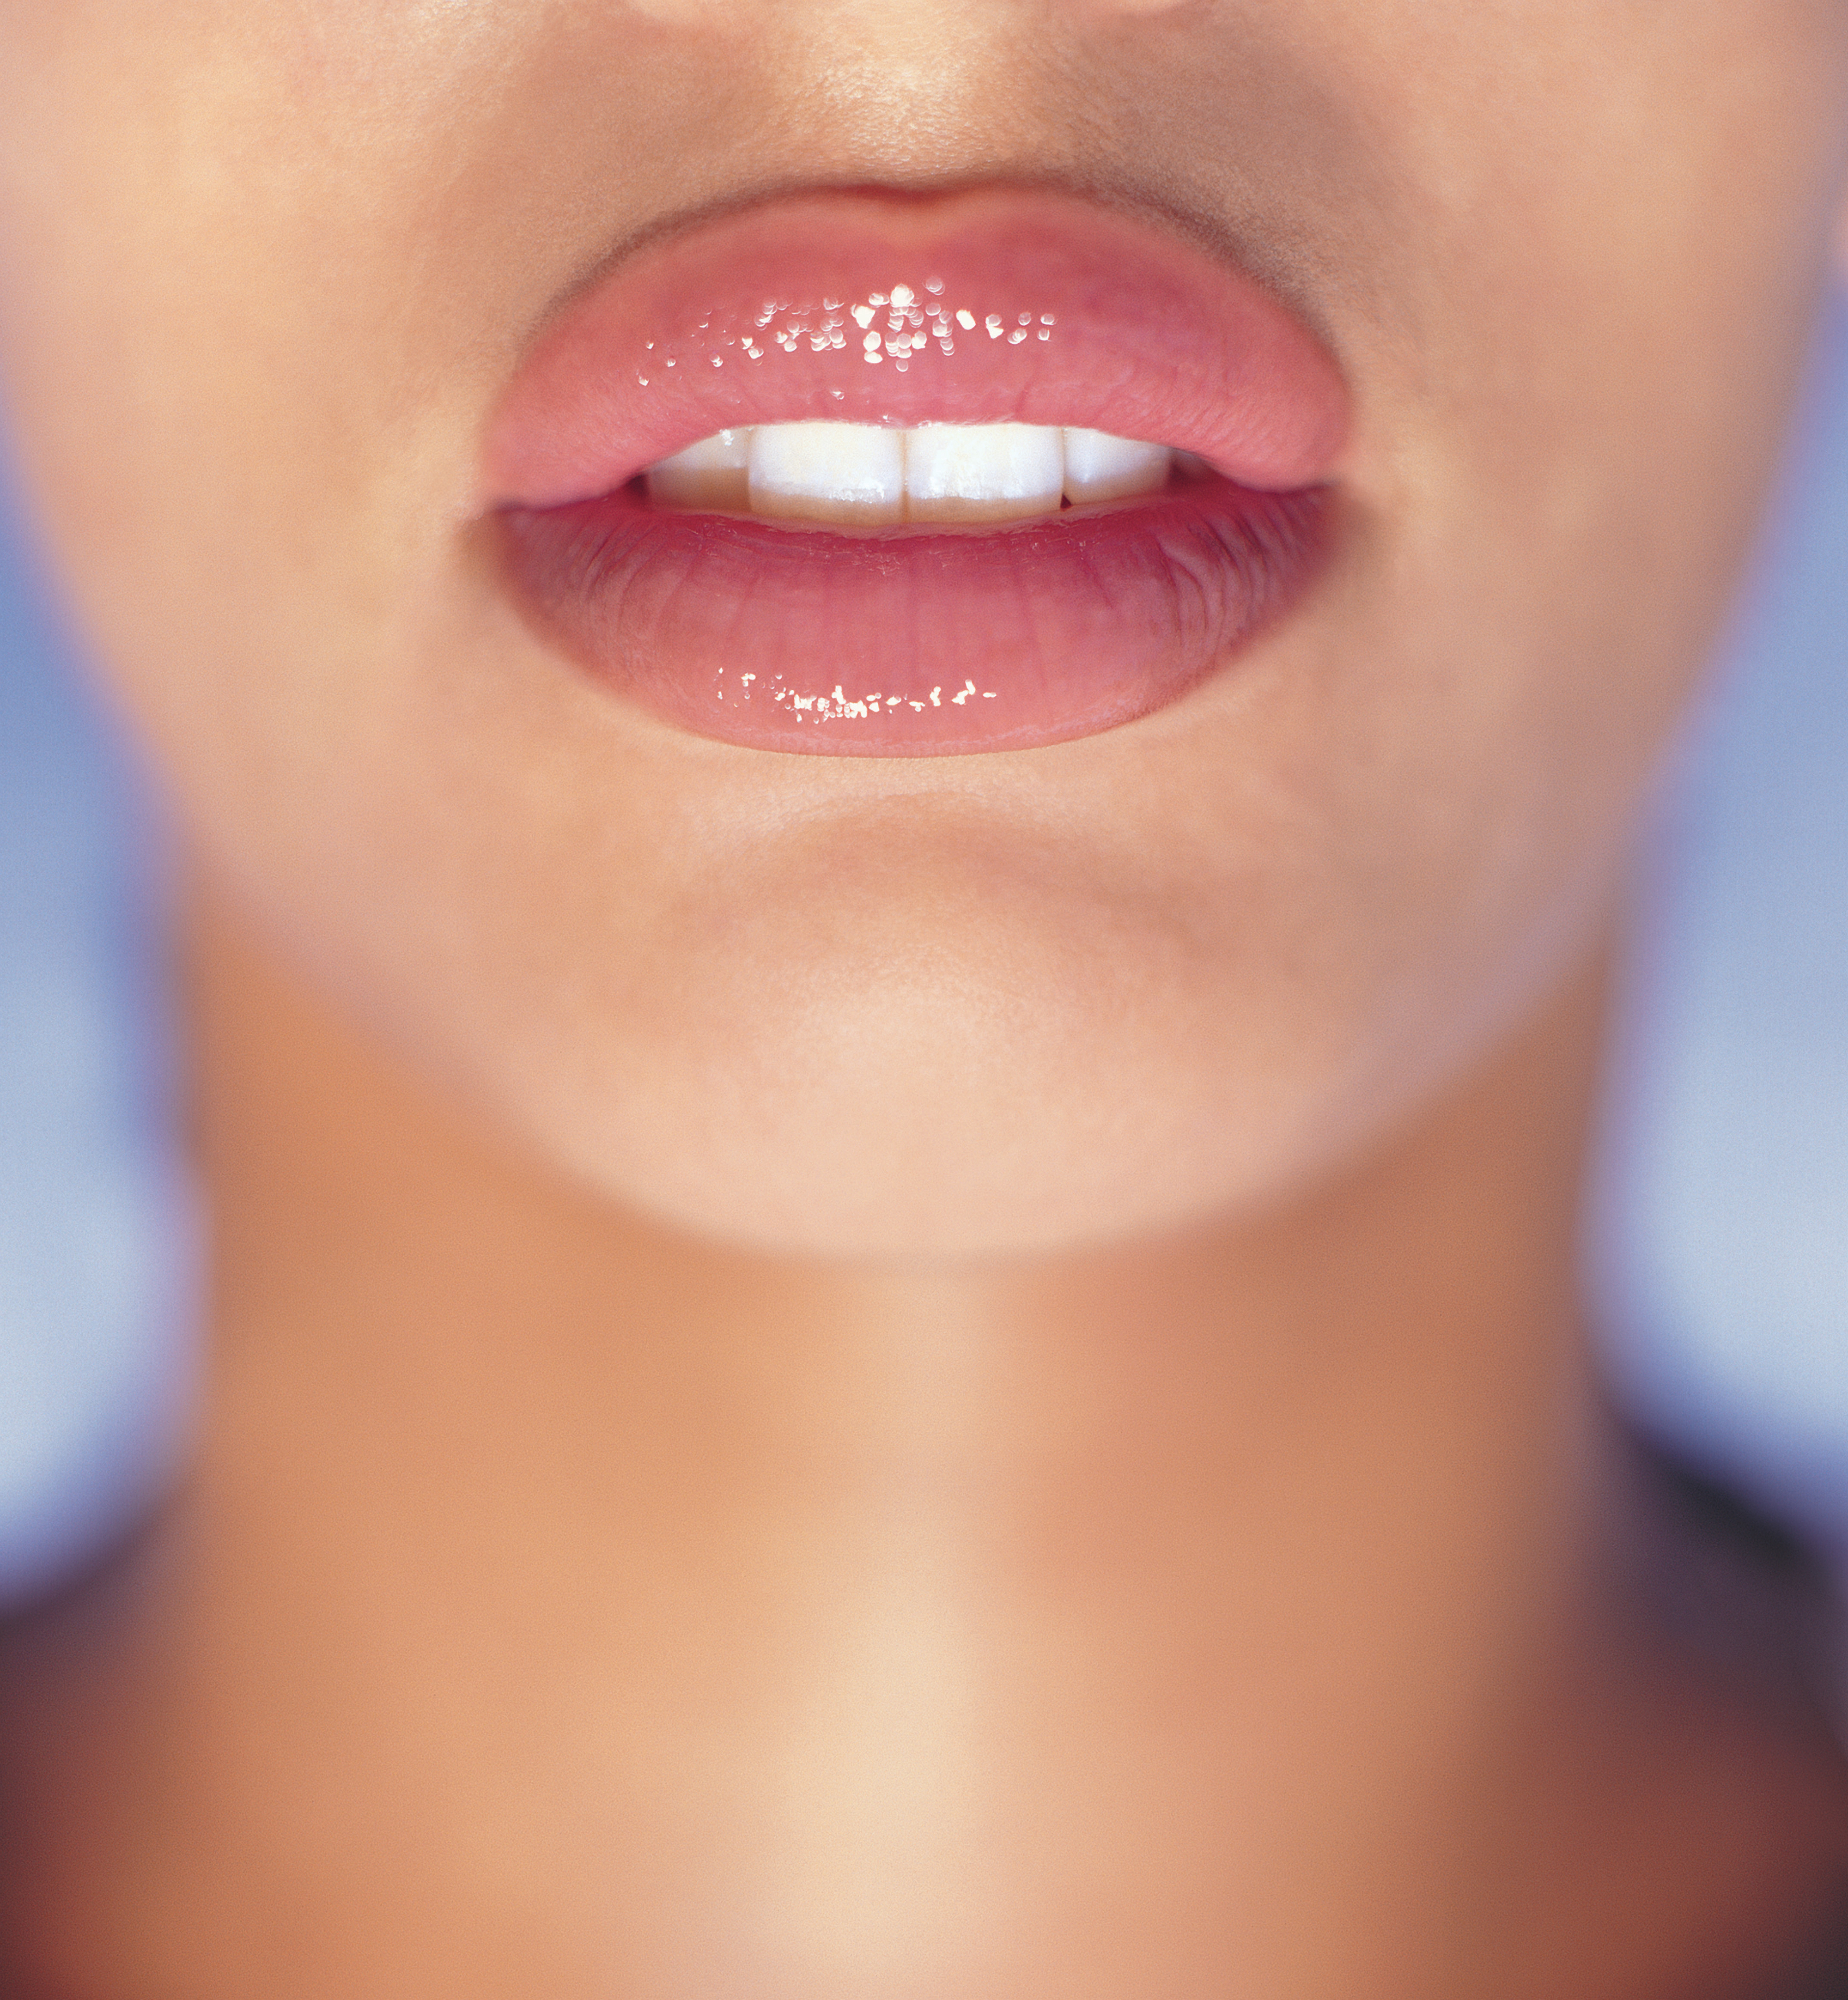 woman with overfilled lips